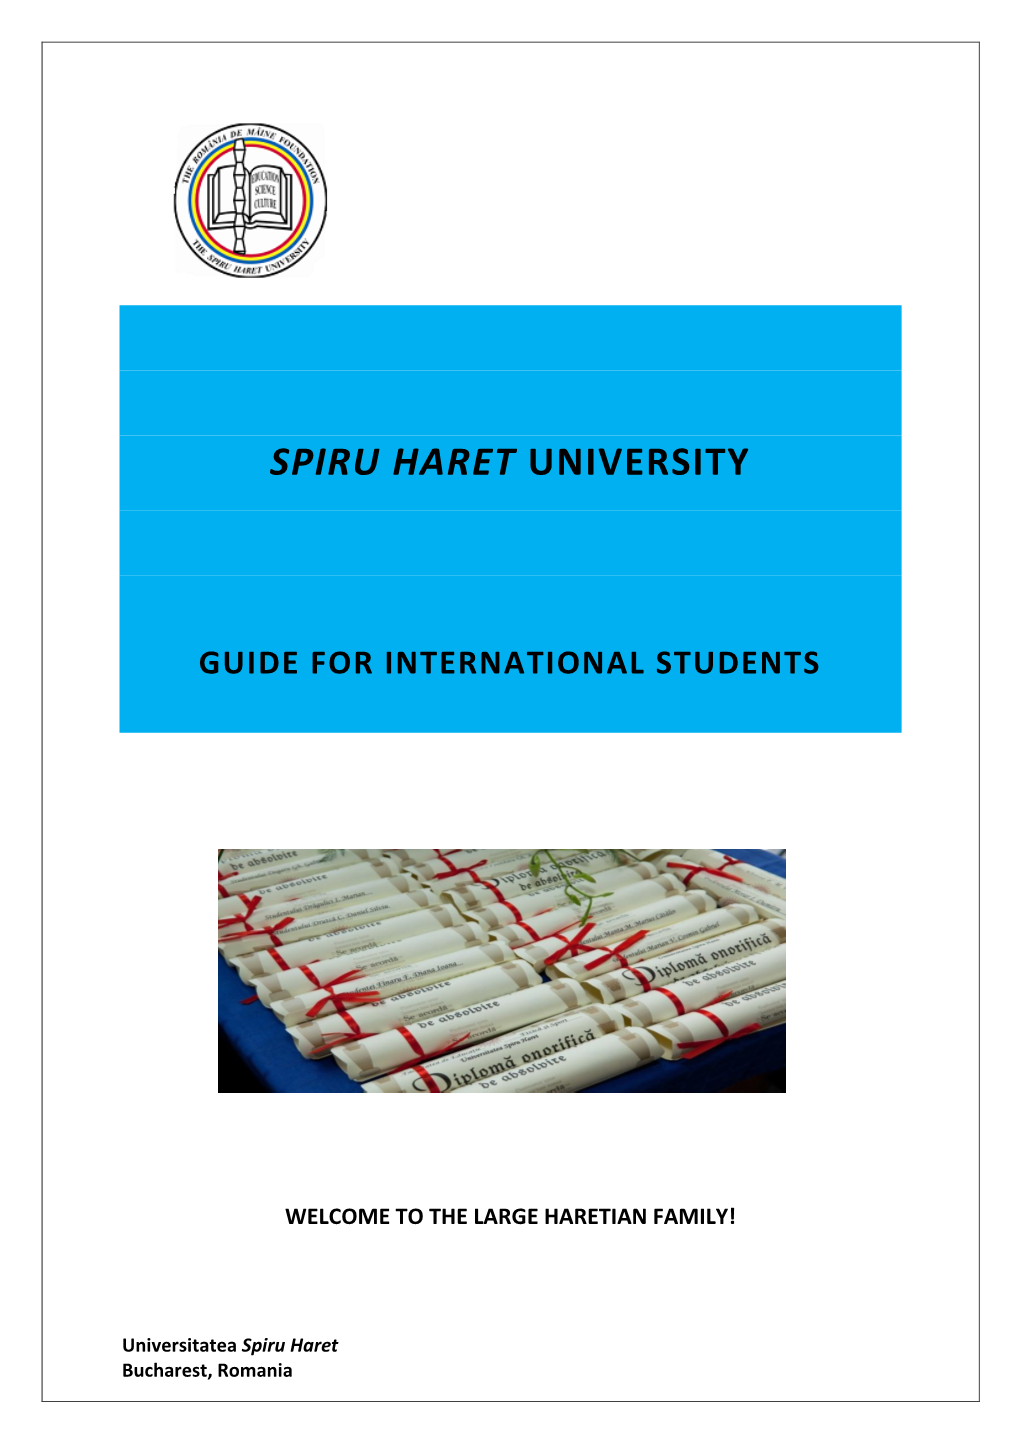 Guide for International Students